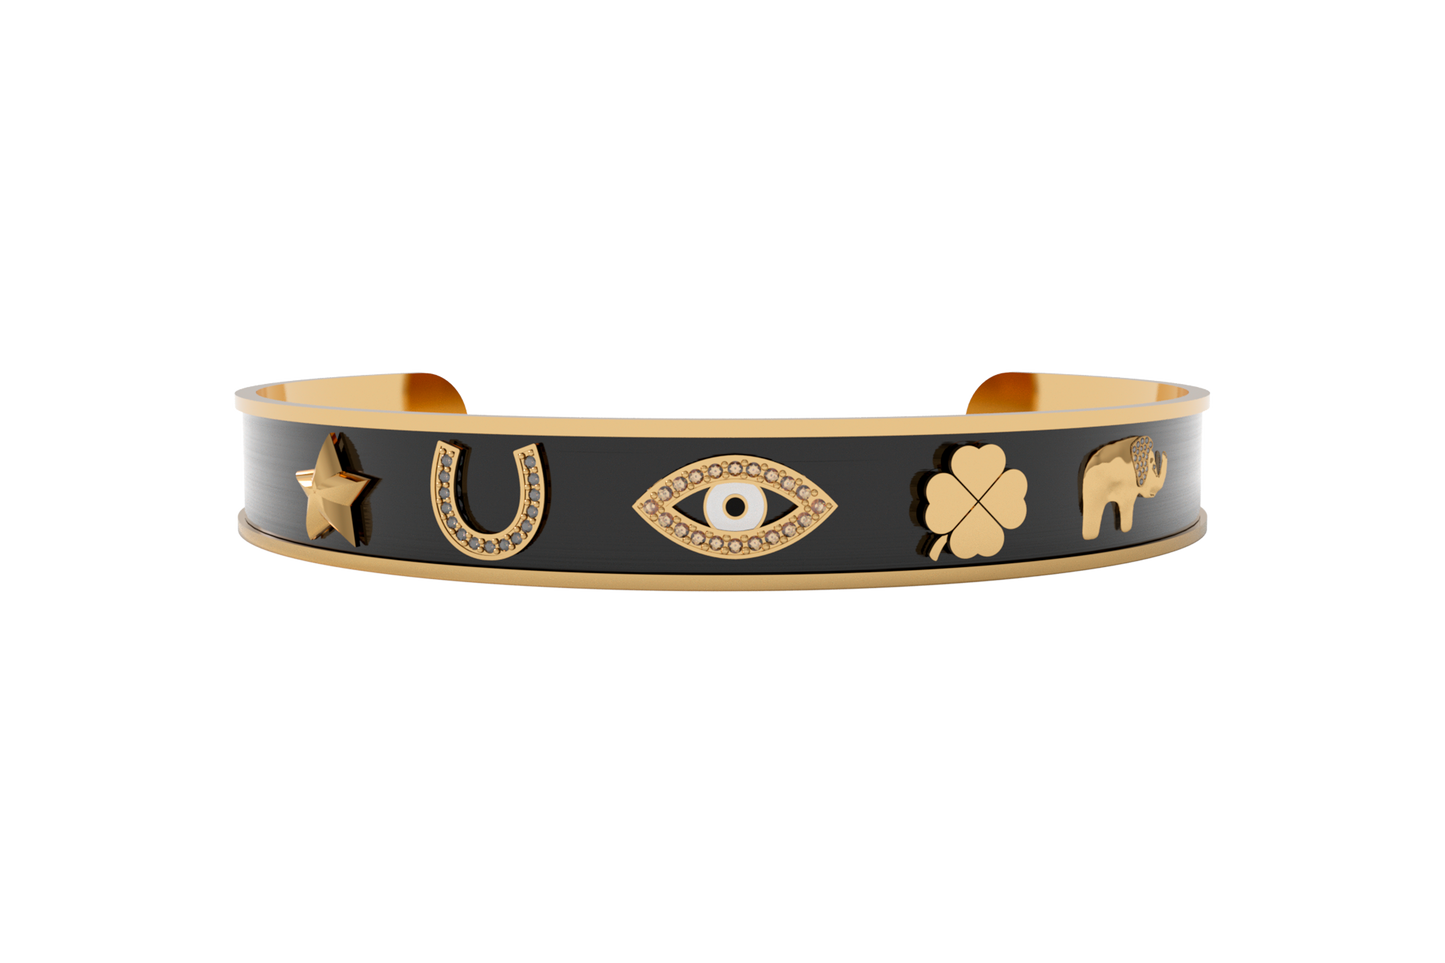 Bracelet "Good Luck" gold plated with Zircons